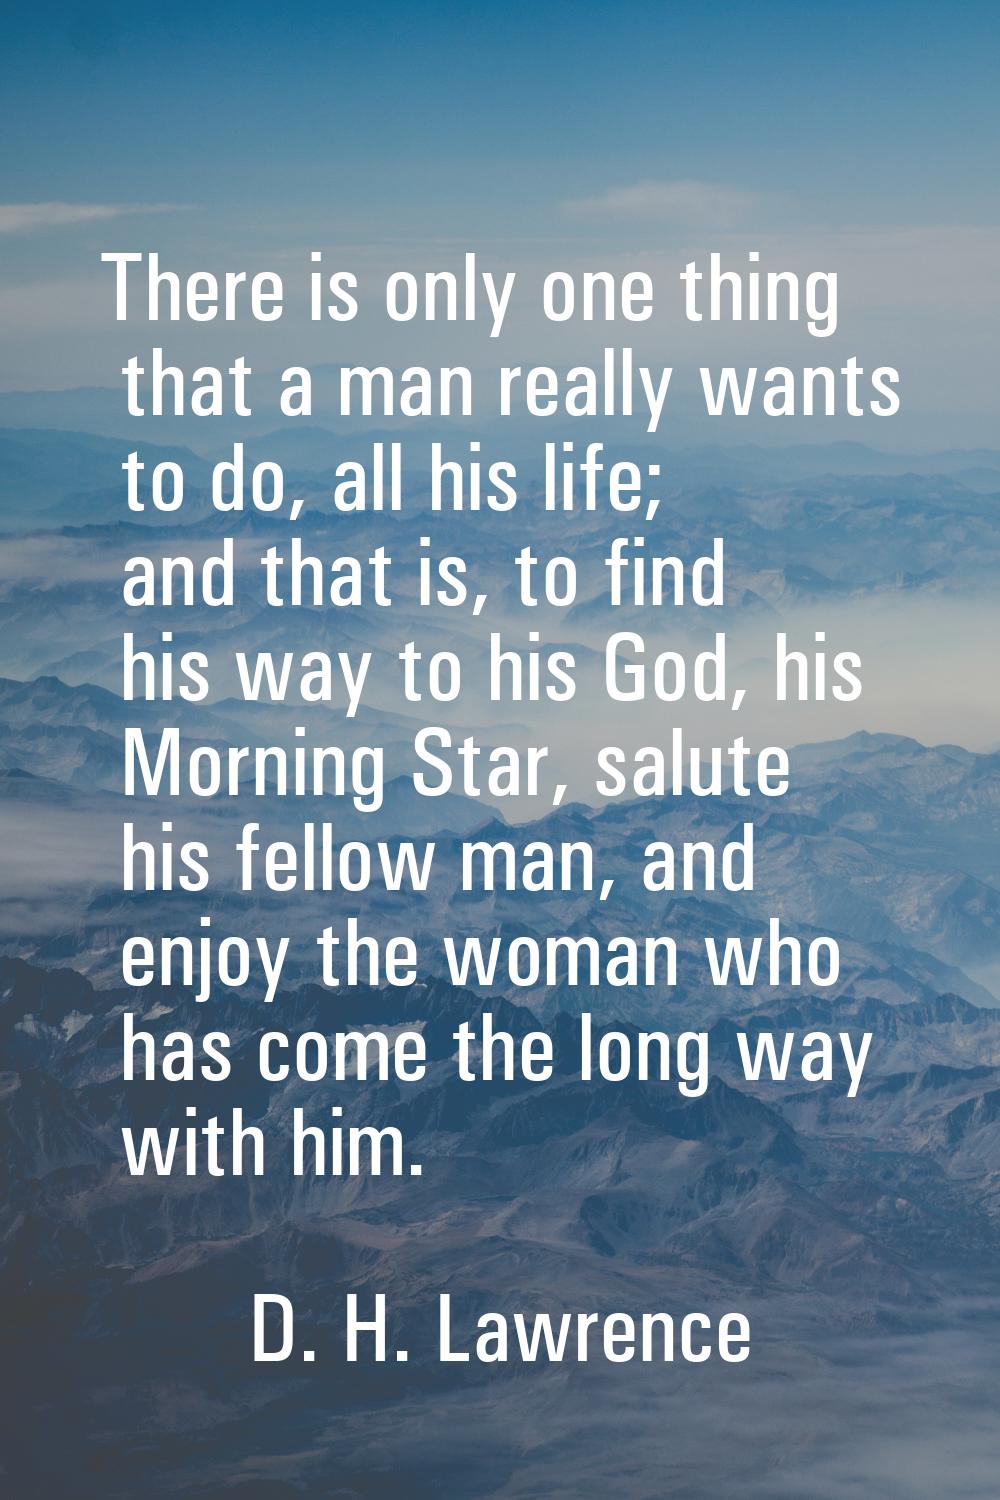 There is only one thing that a man really wants to do, all his life; and that is, to find his way t